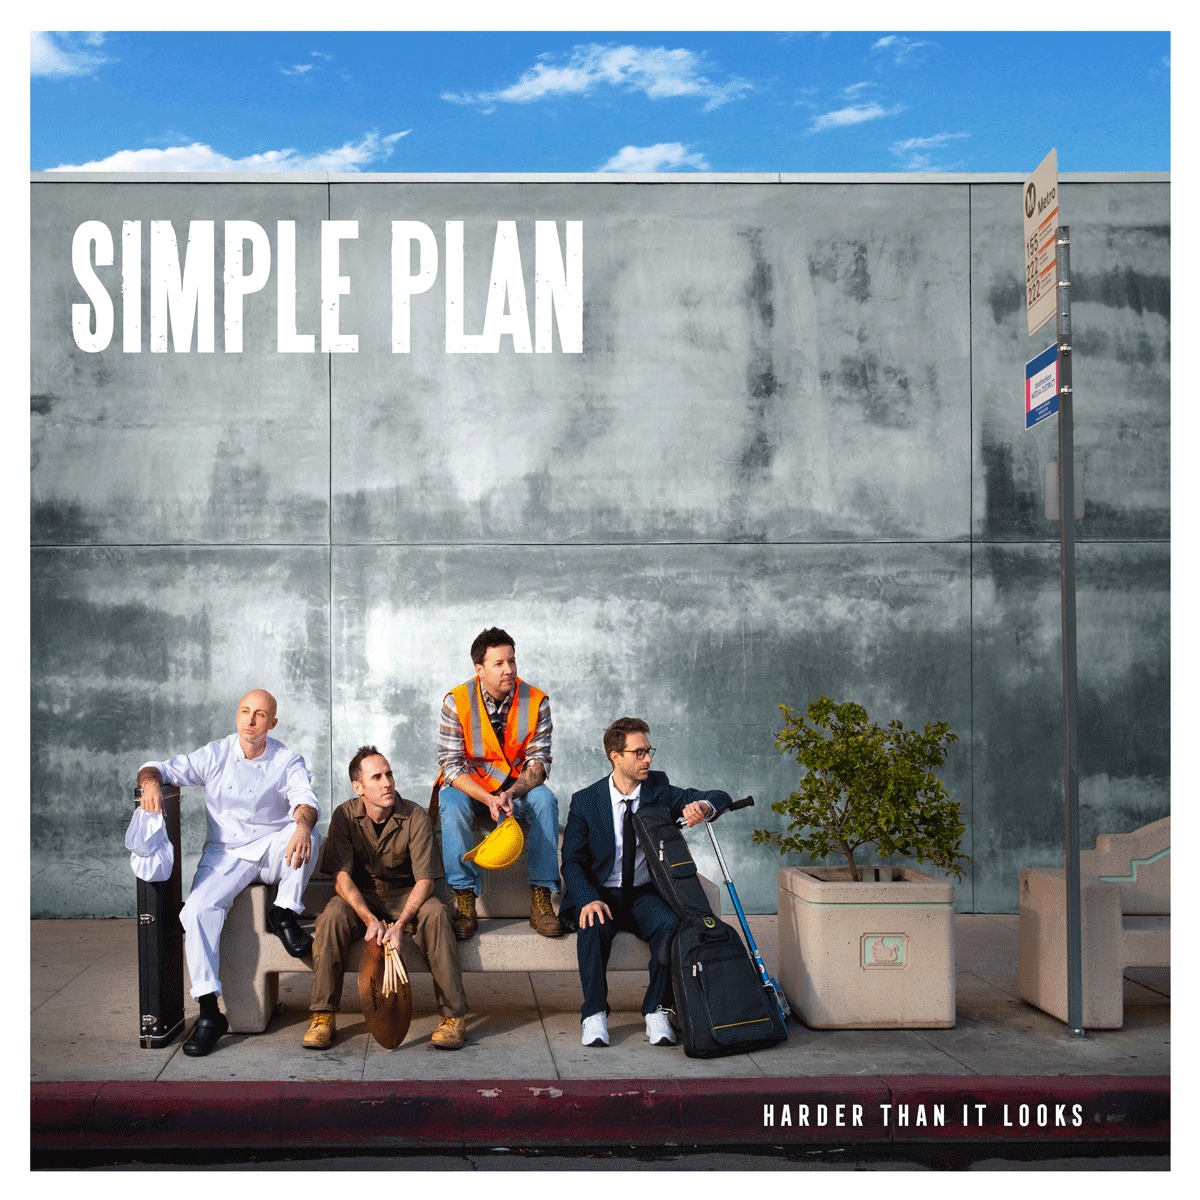 Simple Plan — Iconic cover artwork